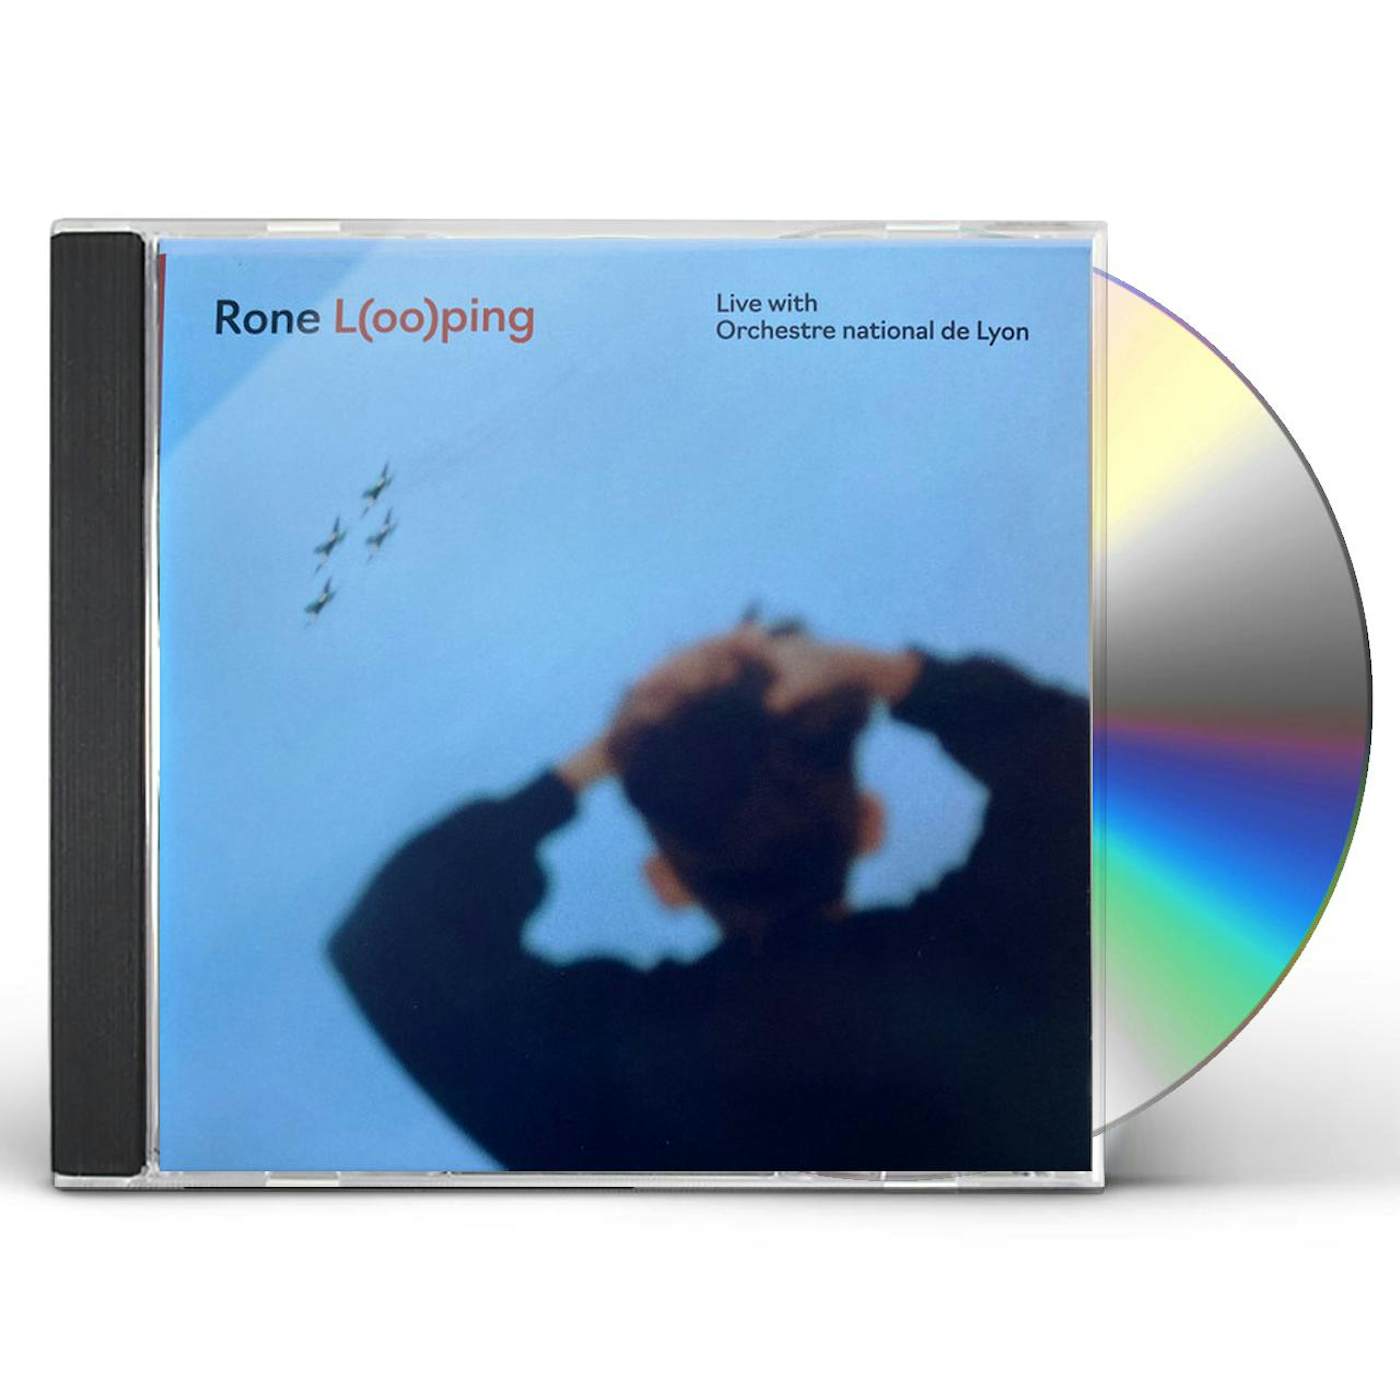 Rone L(OO)PING CD